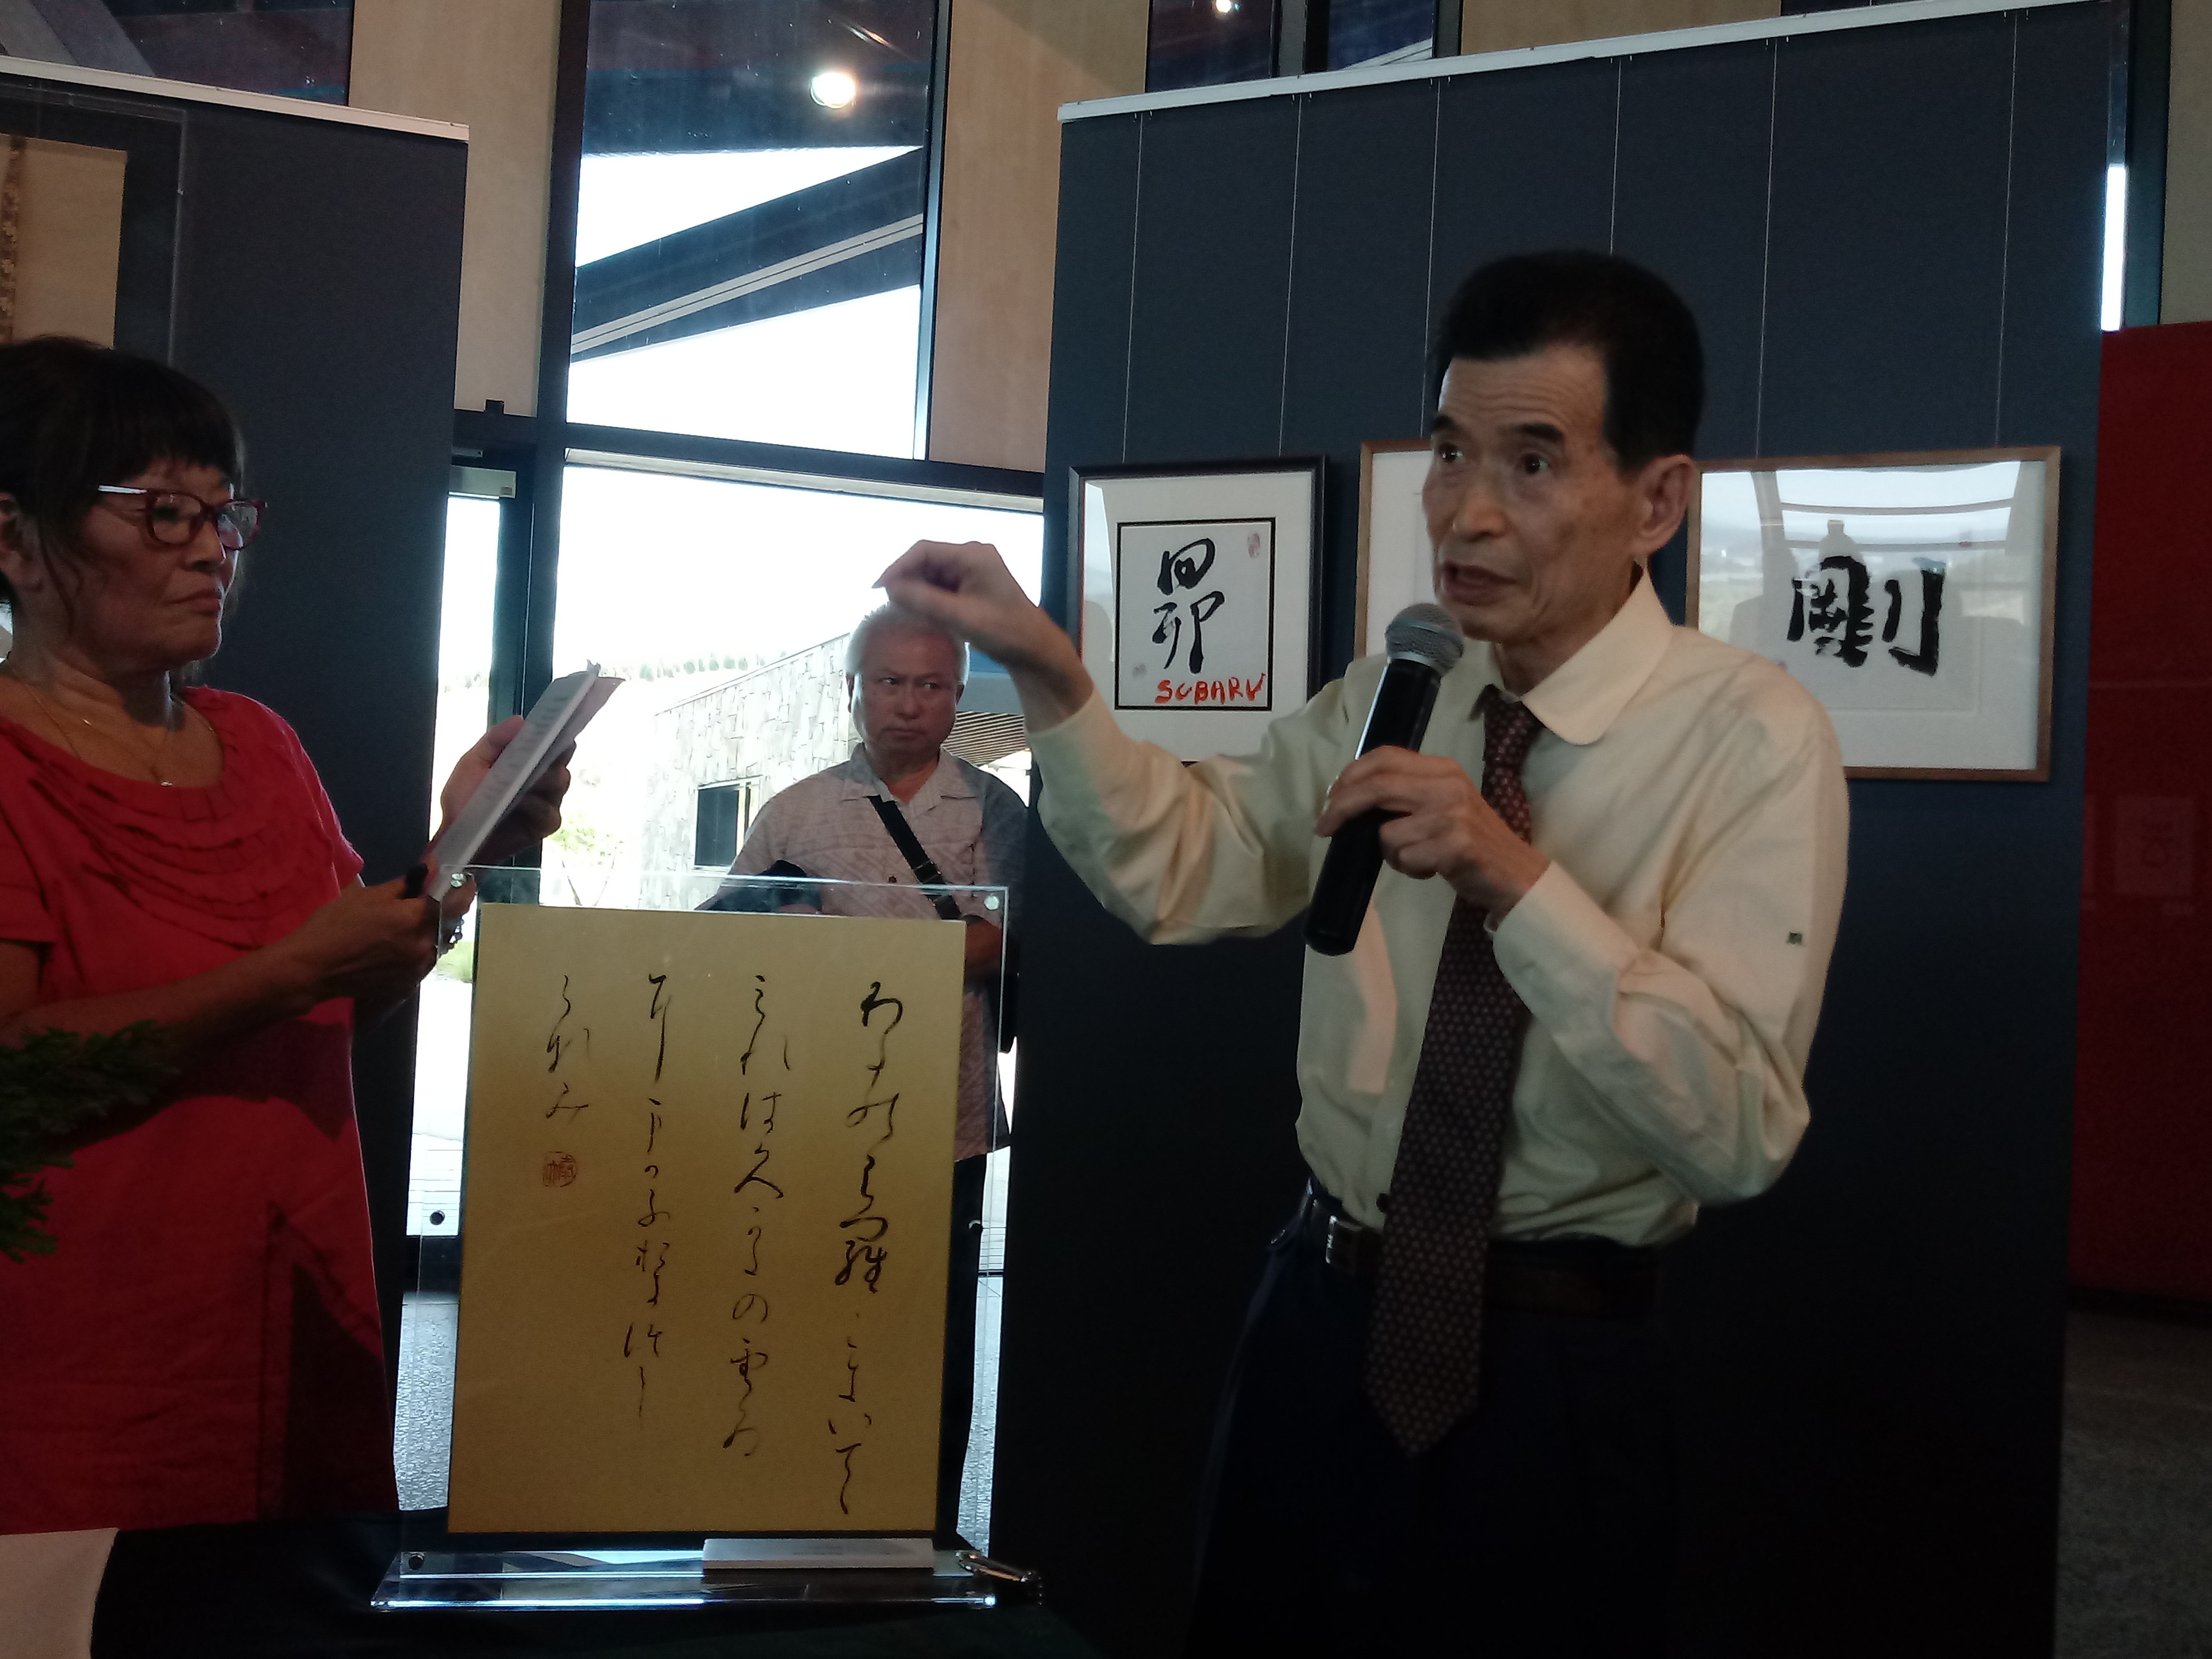 Modern Japanese calligraphy exhibition launched at National Arboretum in Canberra